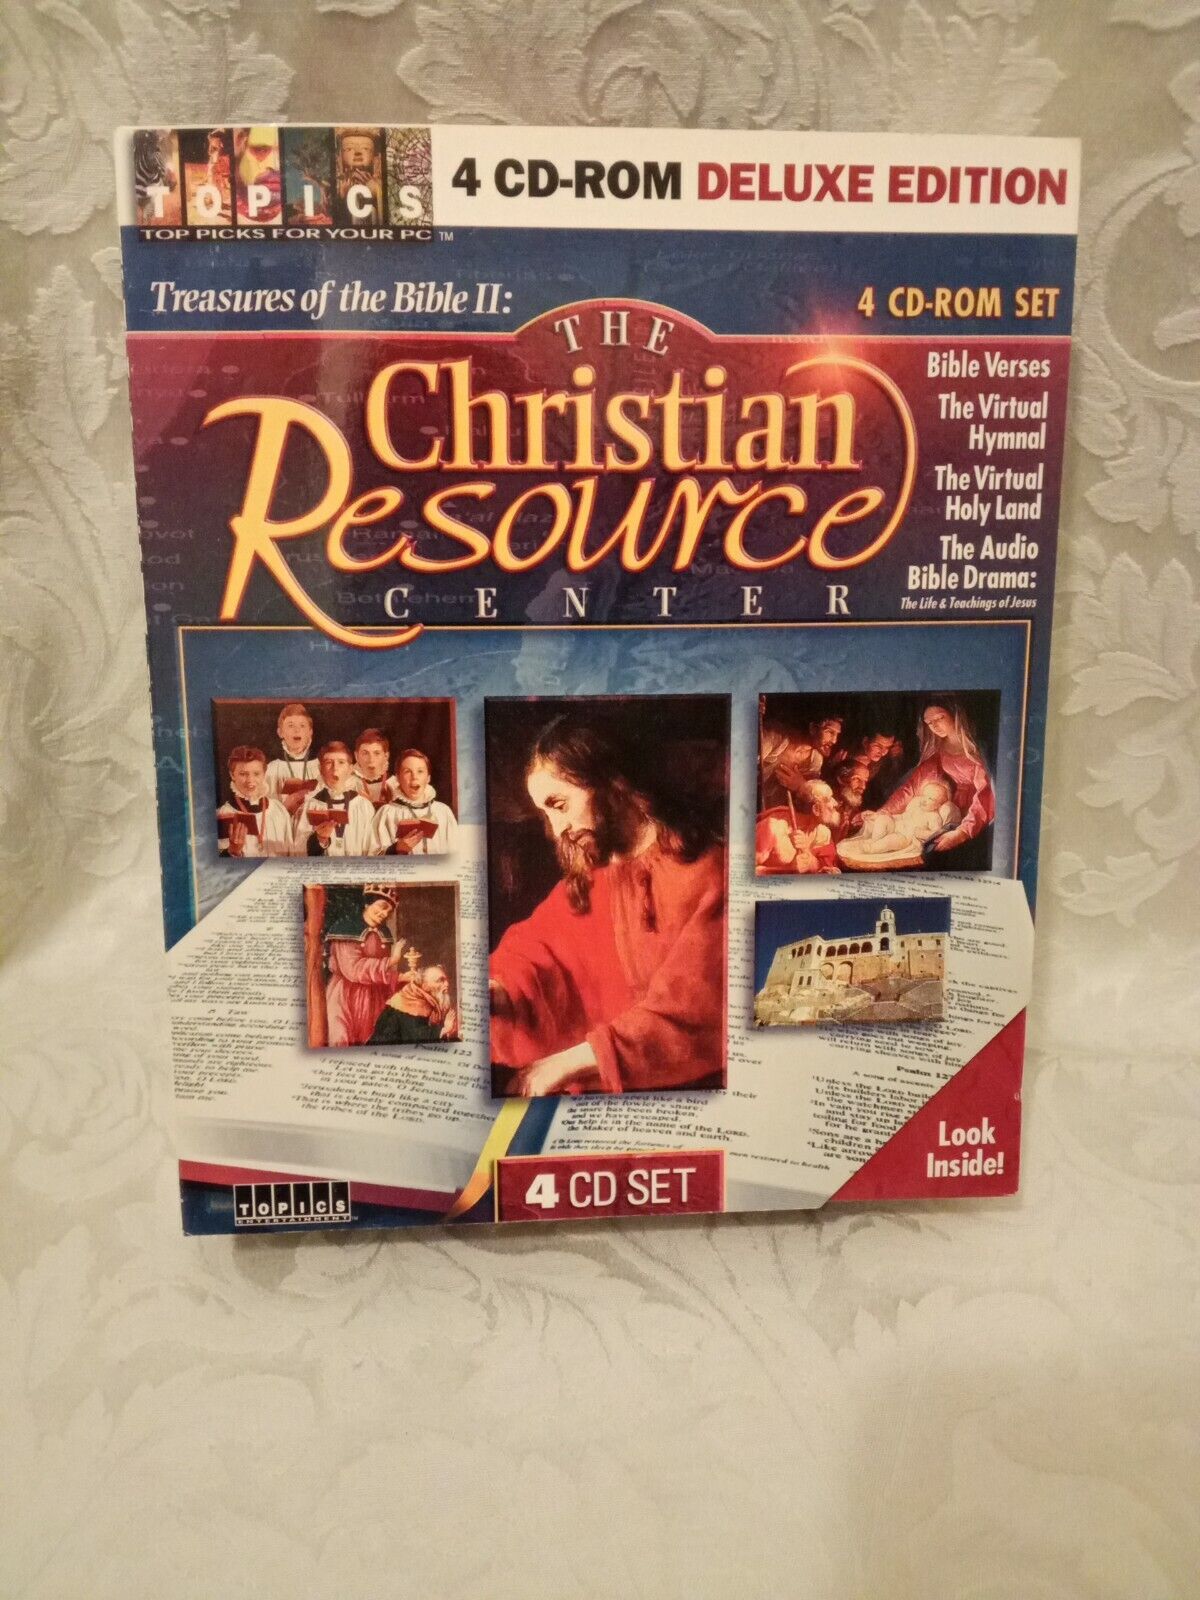 Treasures Of The Bible II: The Christian Resource Center 4 CD ROM Deluxe Edition